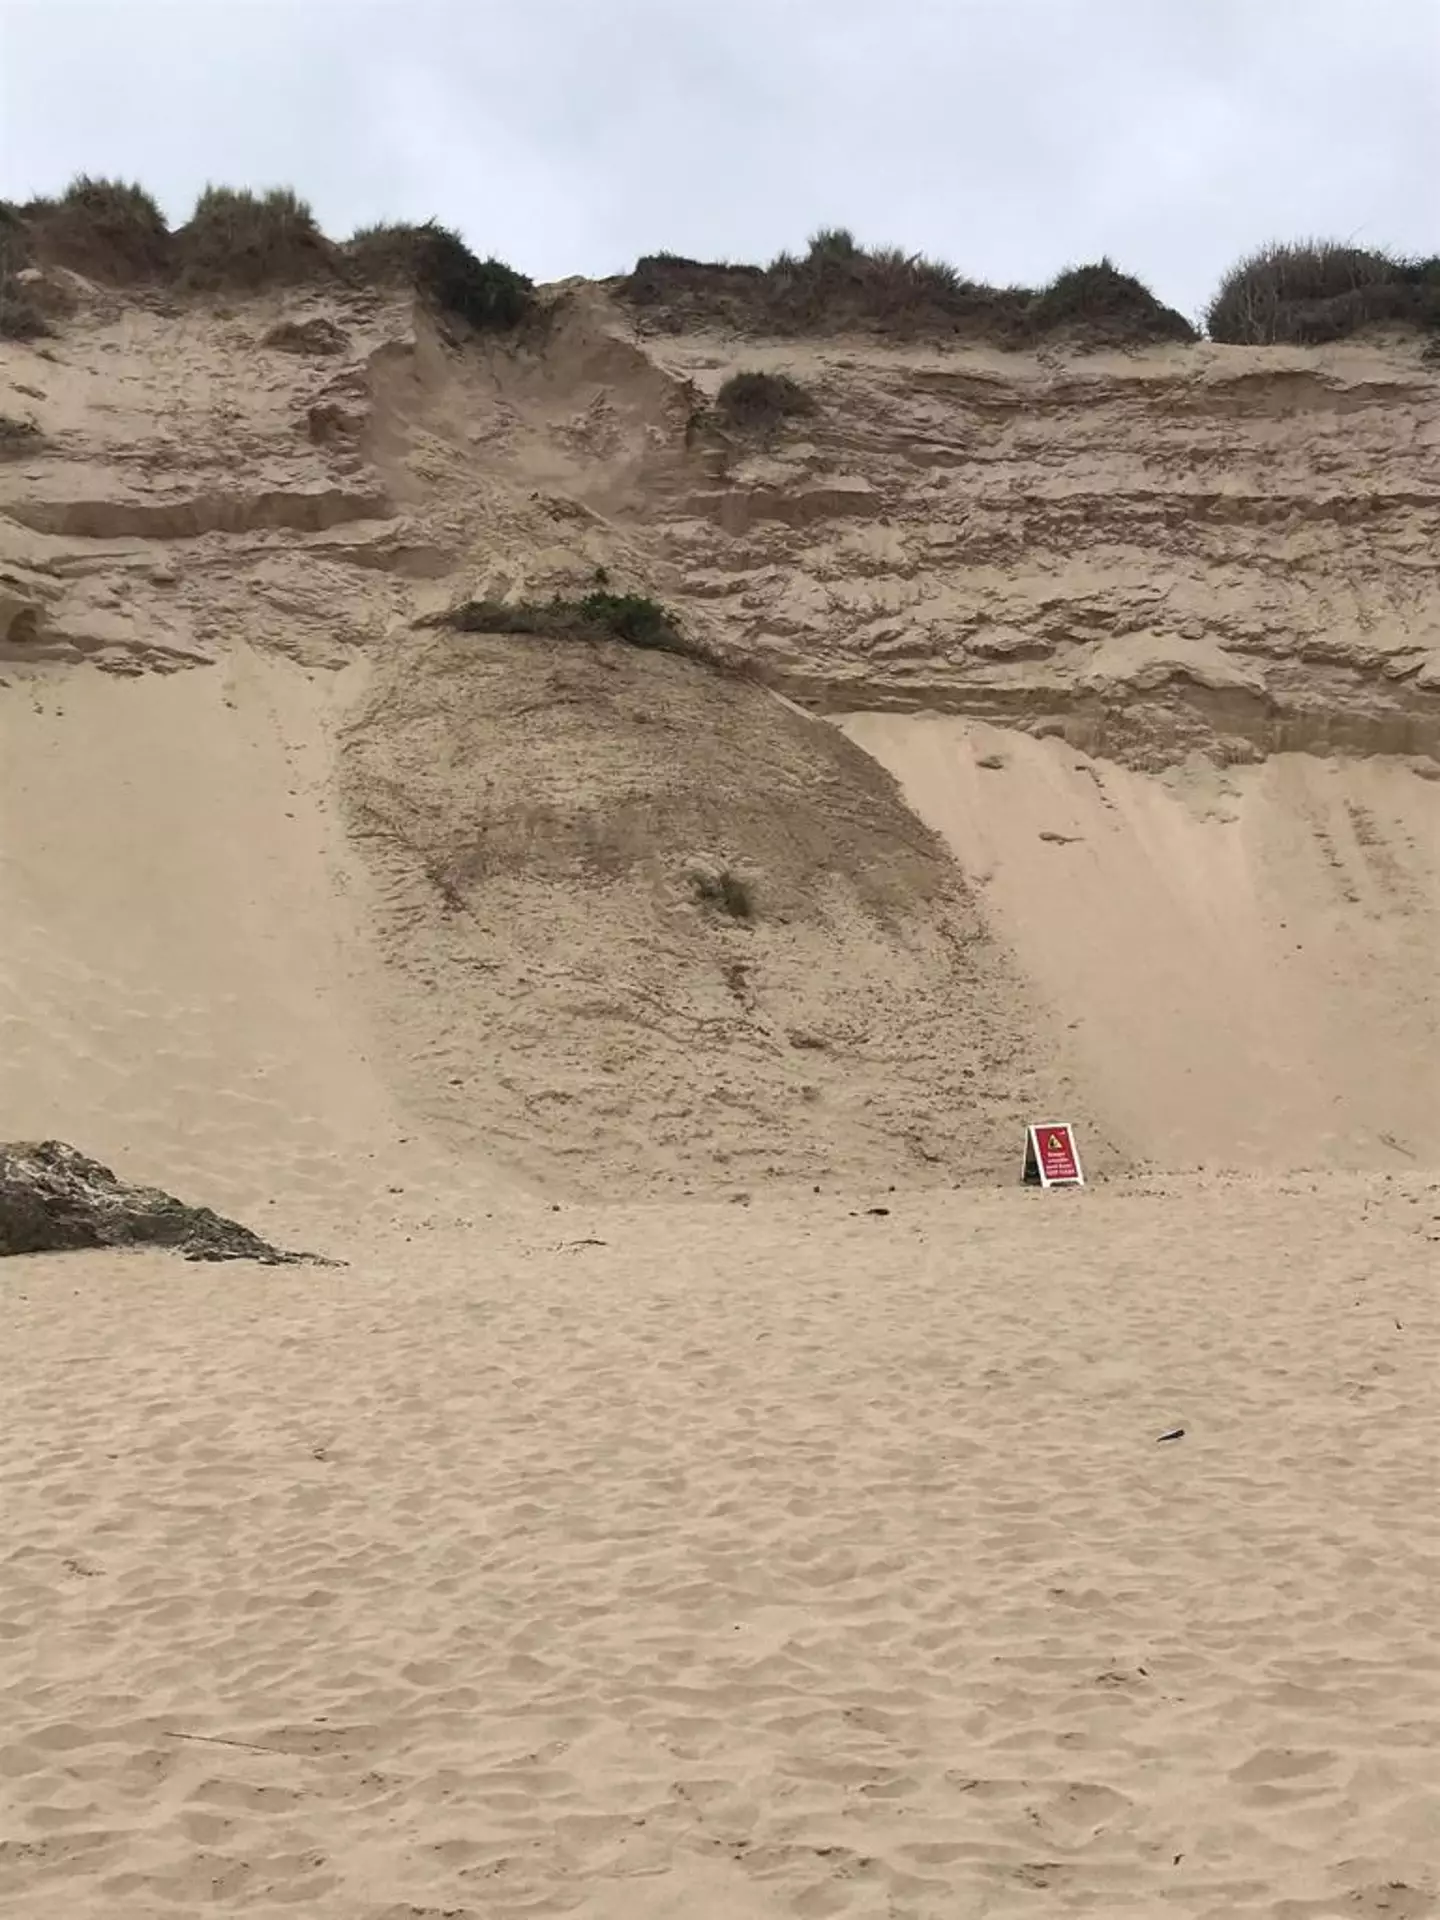 One of the sand dunes at Crantock collapsed earlier this week.